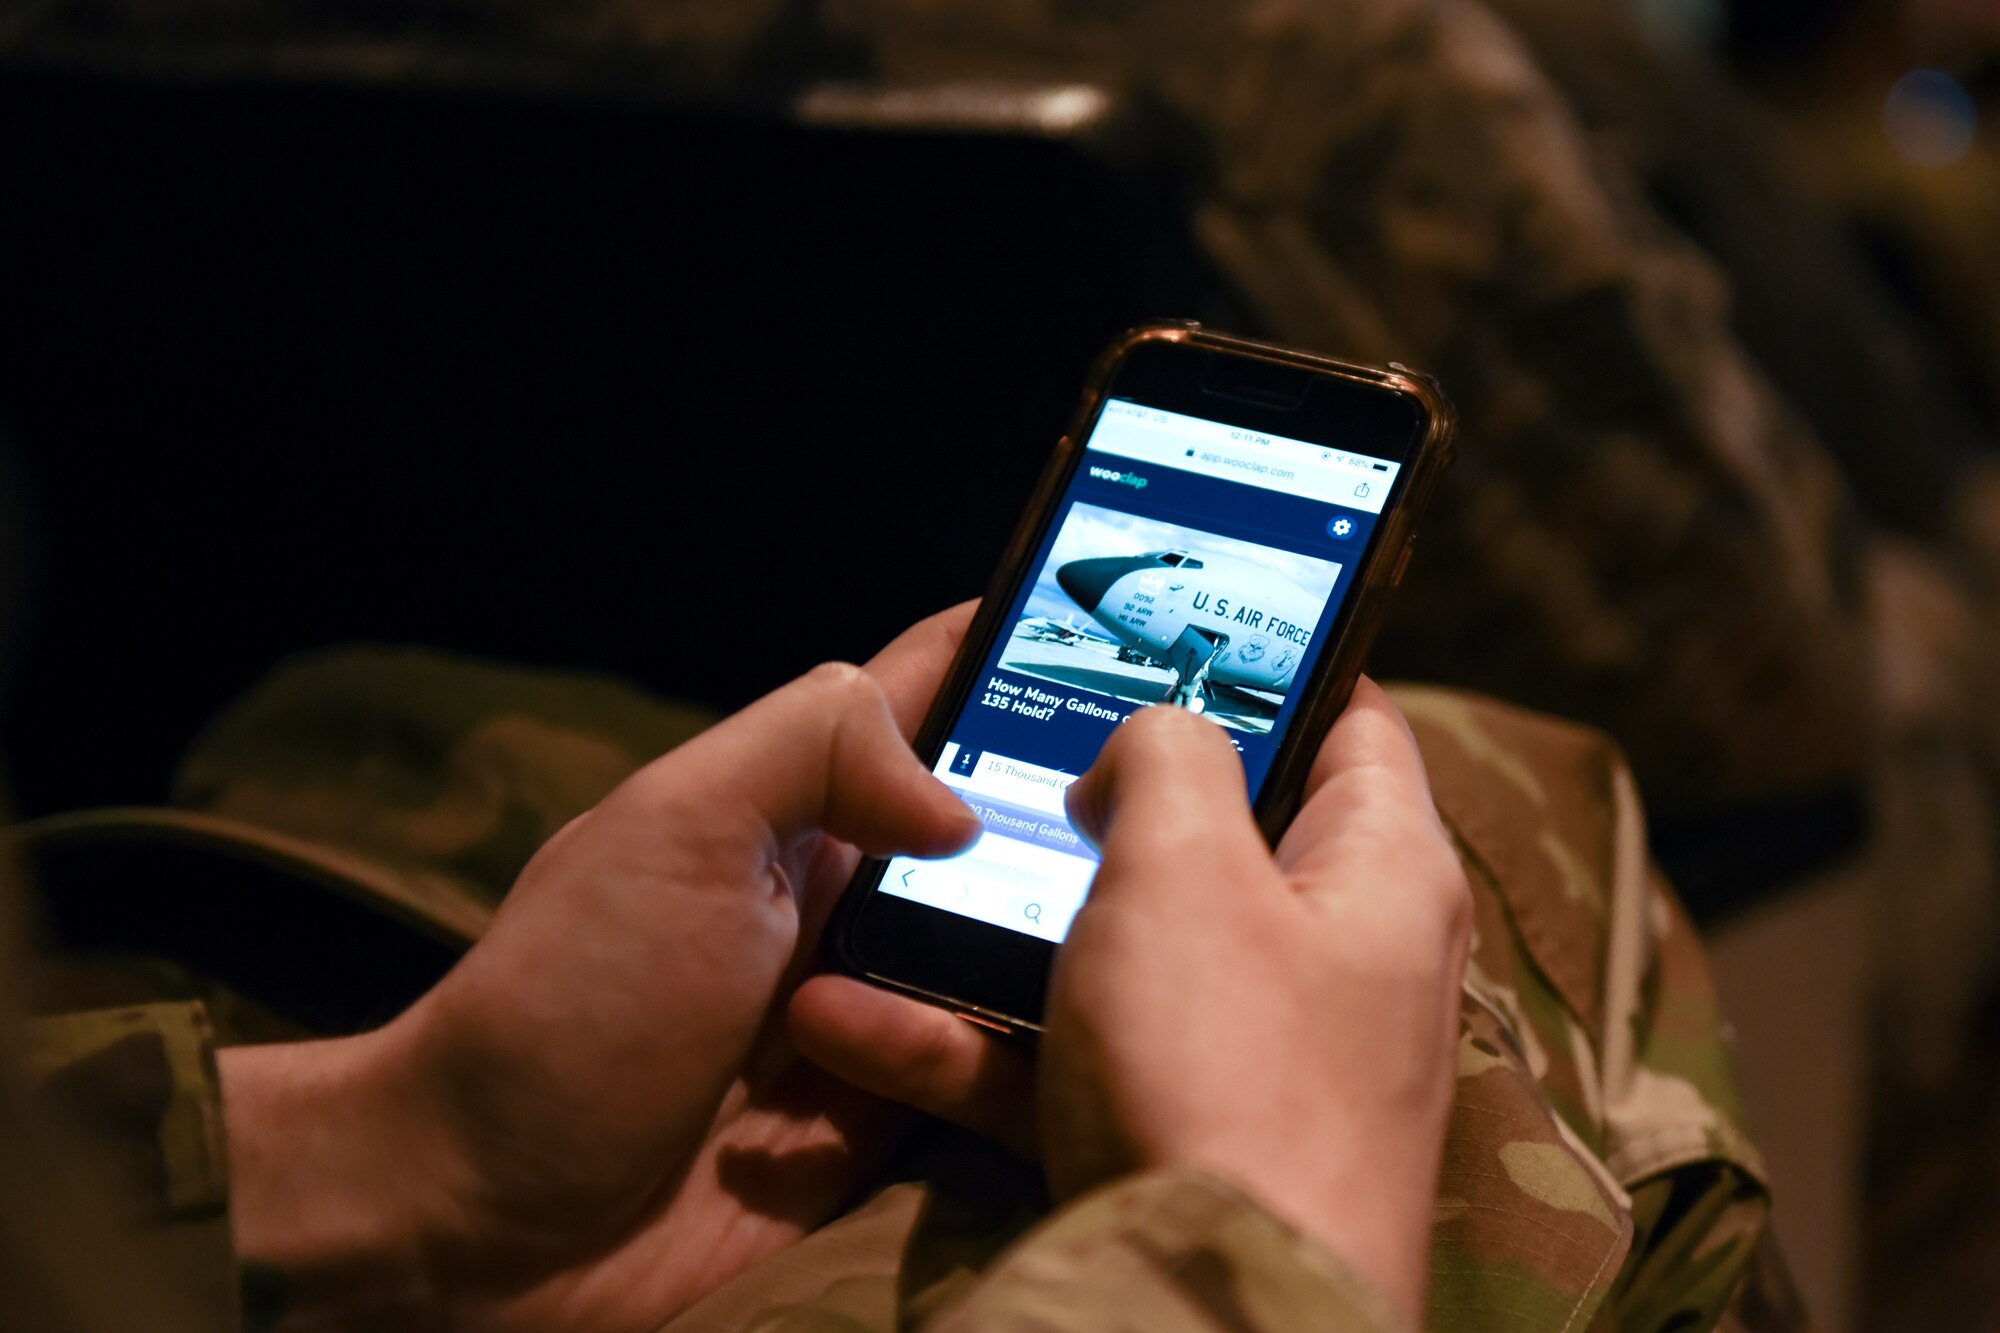 A Team Fairchild airman uses an interactive poll app during a “State of the Wing” all-call at Fairchild Air Force Base, Washington, March 20, 2019. Salmi connected with Airmen through a real-time question and answer application, polling attendees and addressing concerns via the smart-phone app. (U.S. Air Force photo by Airman 1st Class Whitney Laine)